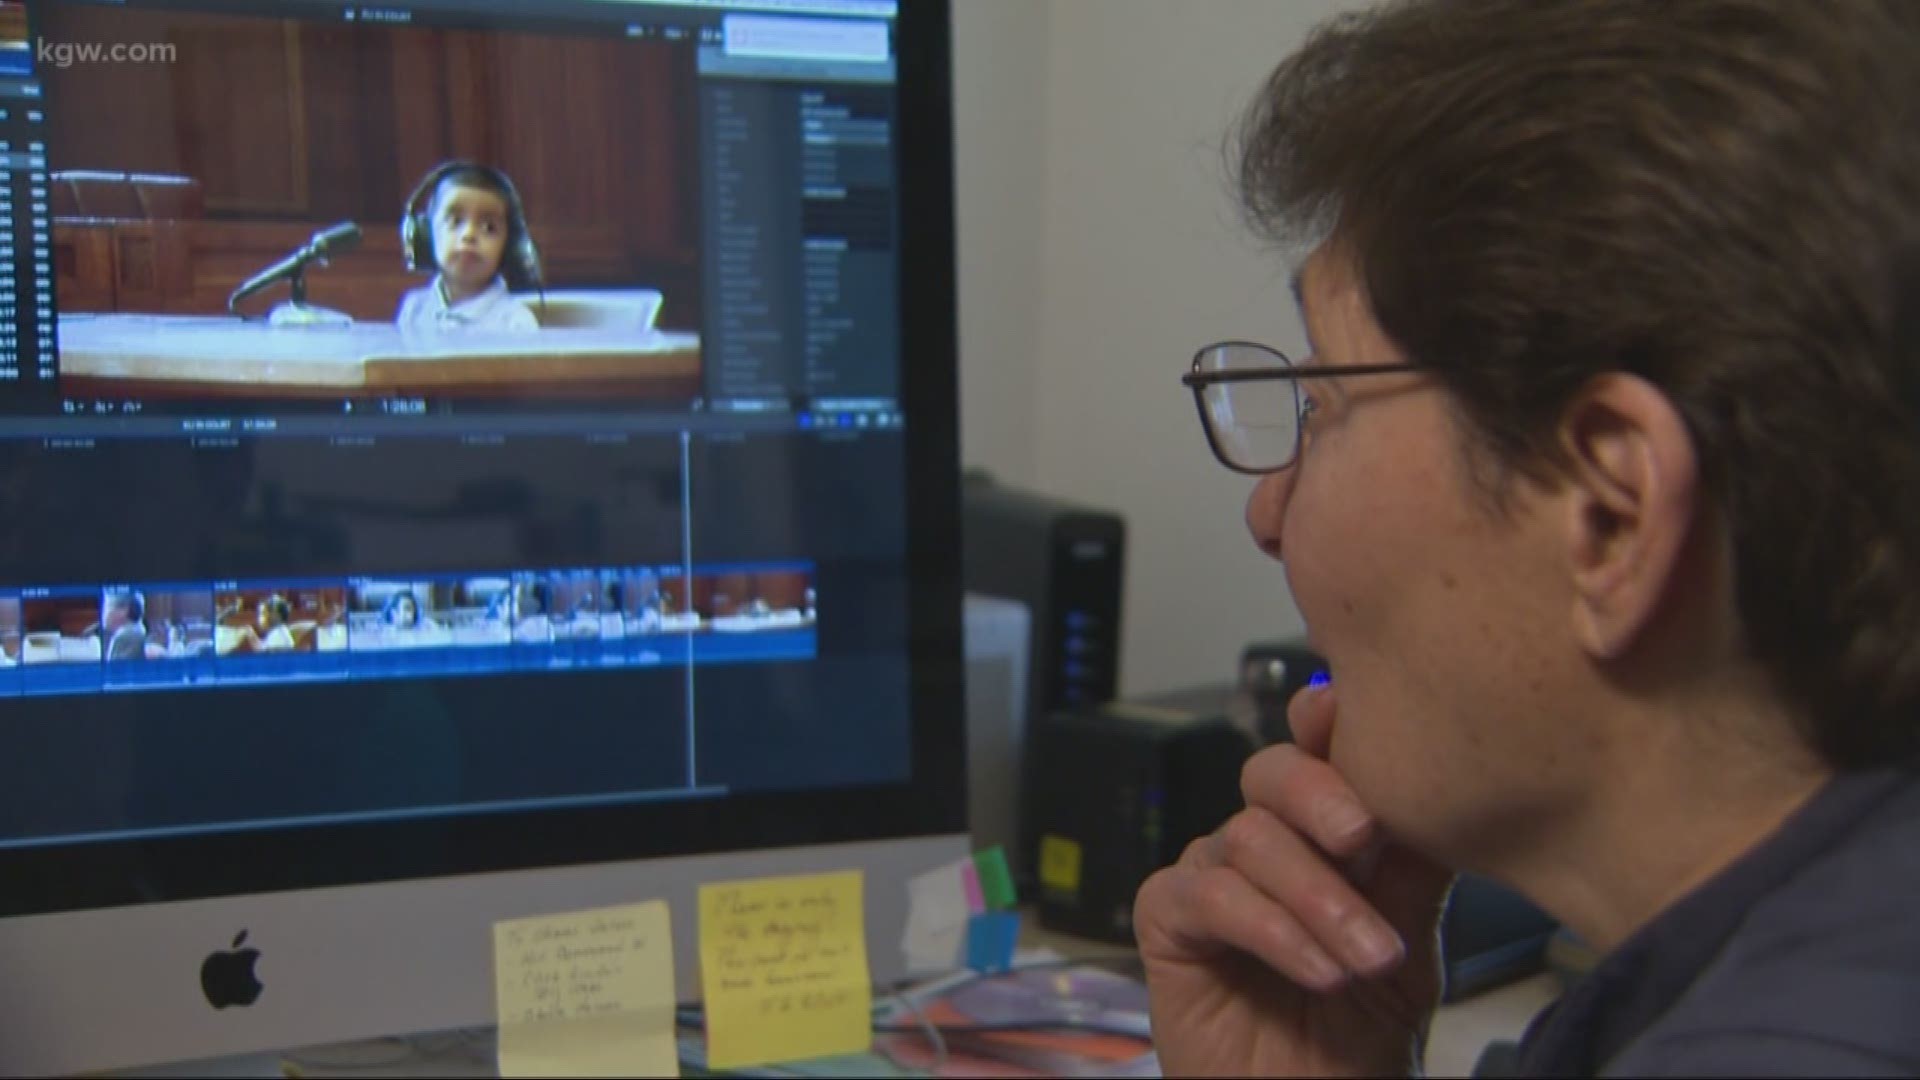 A Portland filmmaker is trying to raise awareness and money to help unaccompanied children forced to go through immigration court alone.